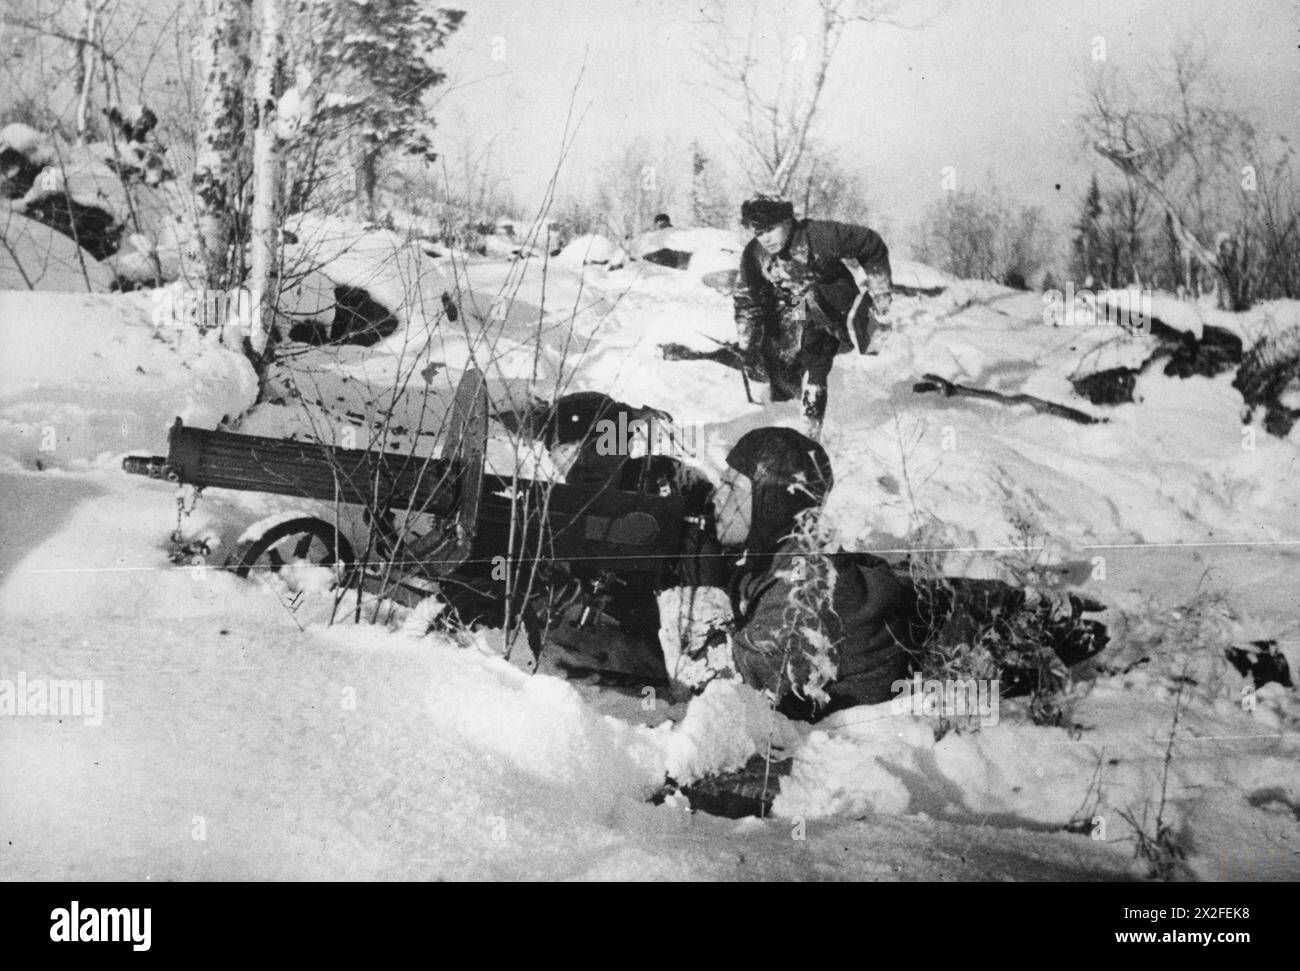 THE RED ARMY ON THE EASTERN FRONT, 1941-1945 - A Soviet PM M1910 Maxim heavy machine gun and crew operating in the snow, probably March 1942 Red Army Stock Photo